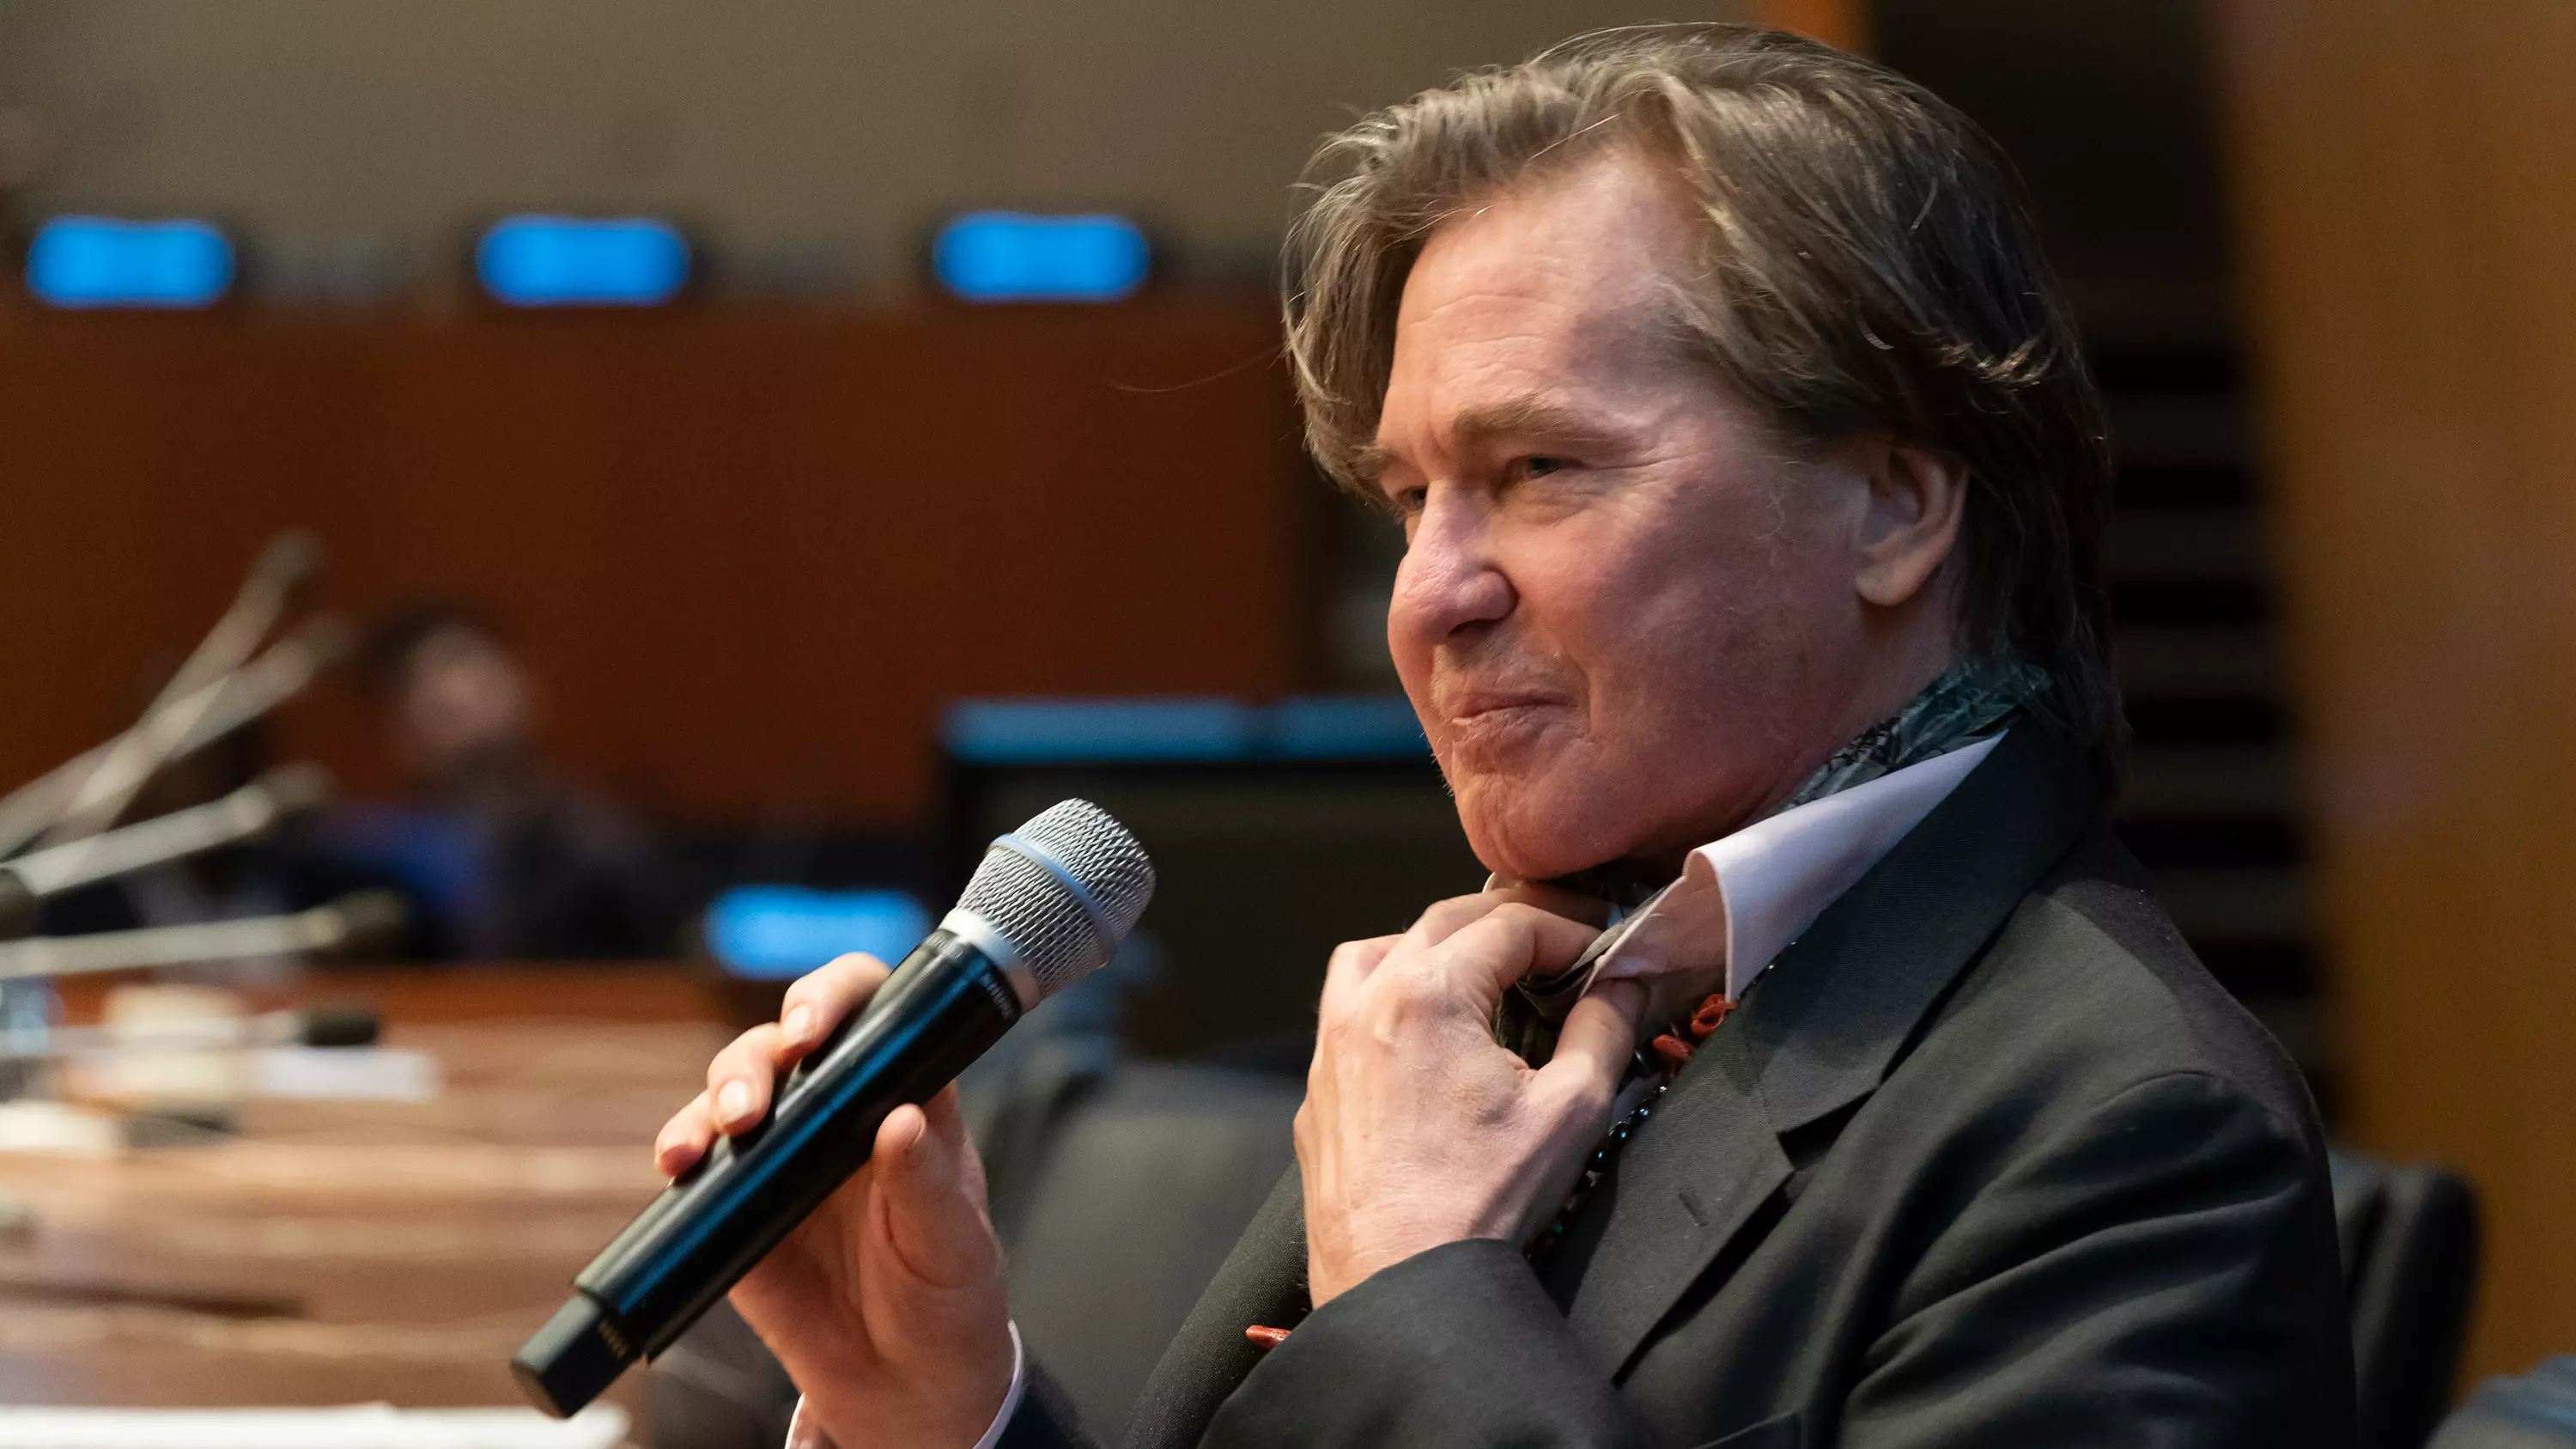 Val Kilmer's Old Speaking Voice Recreated Using Artificial Intelligence